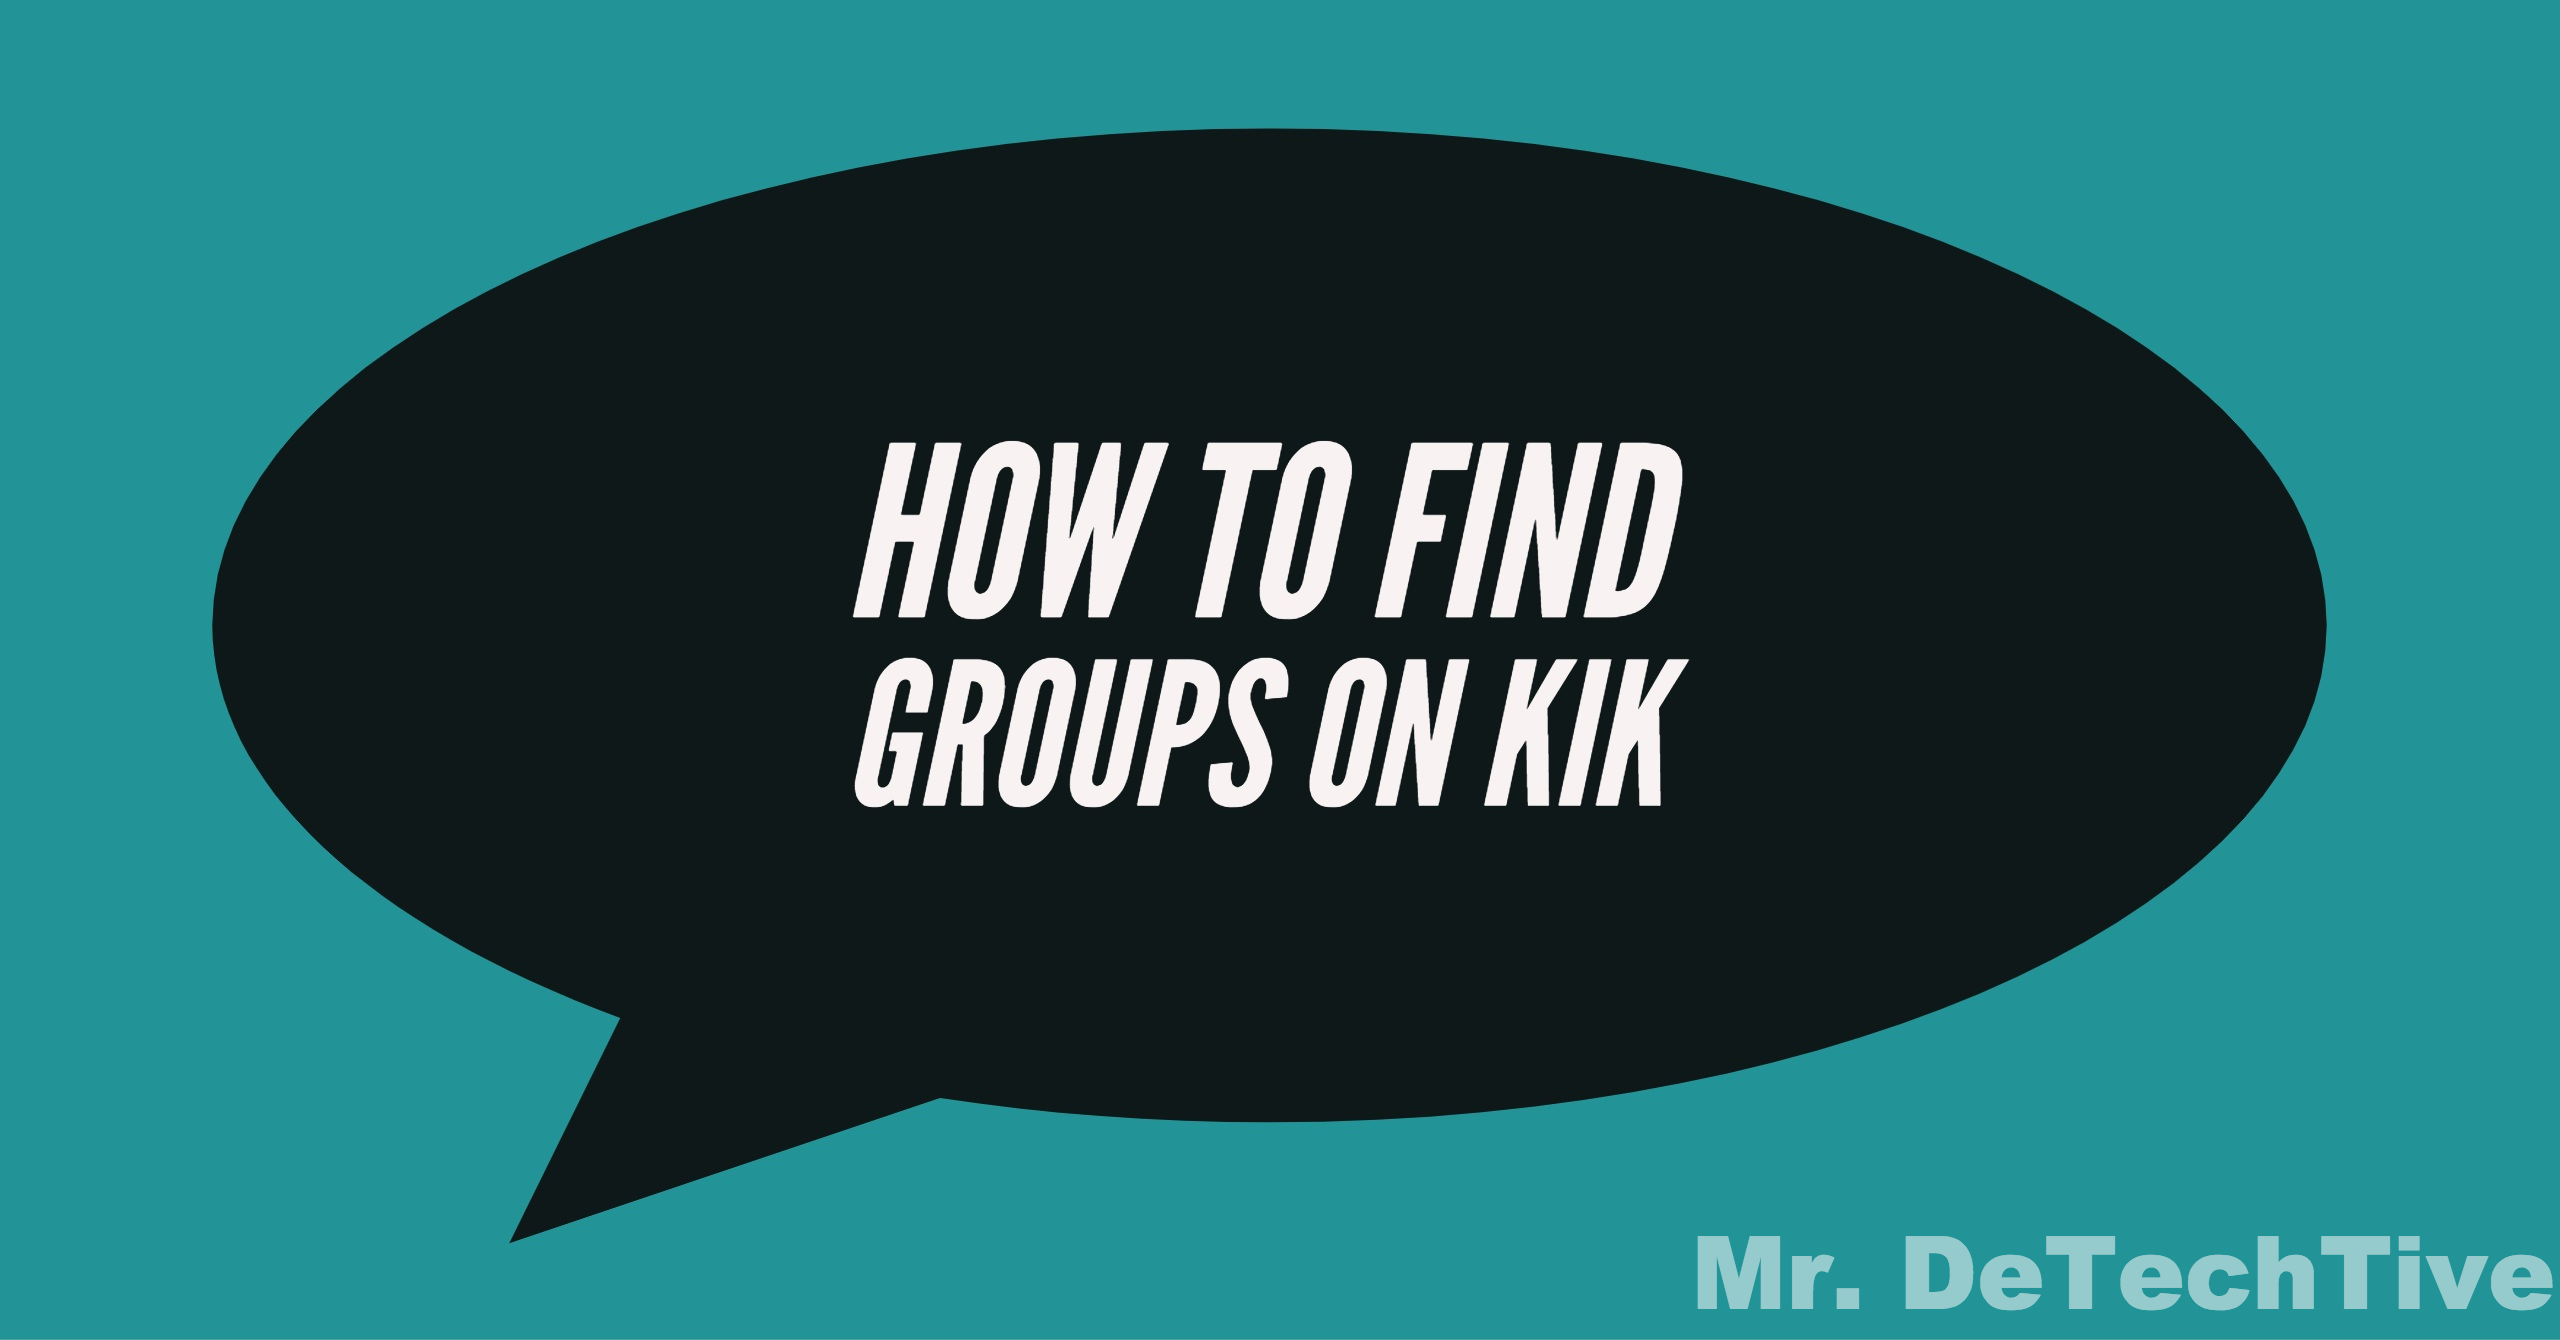 How to find KIK groups